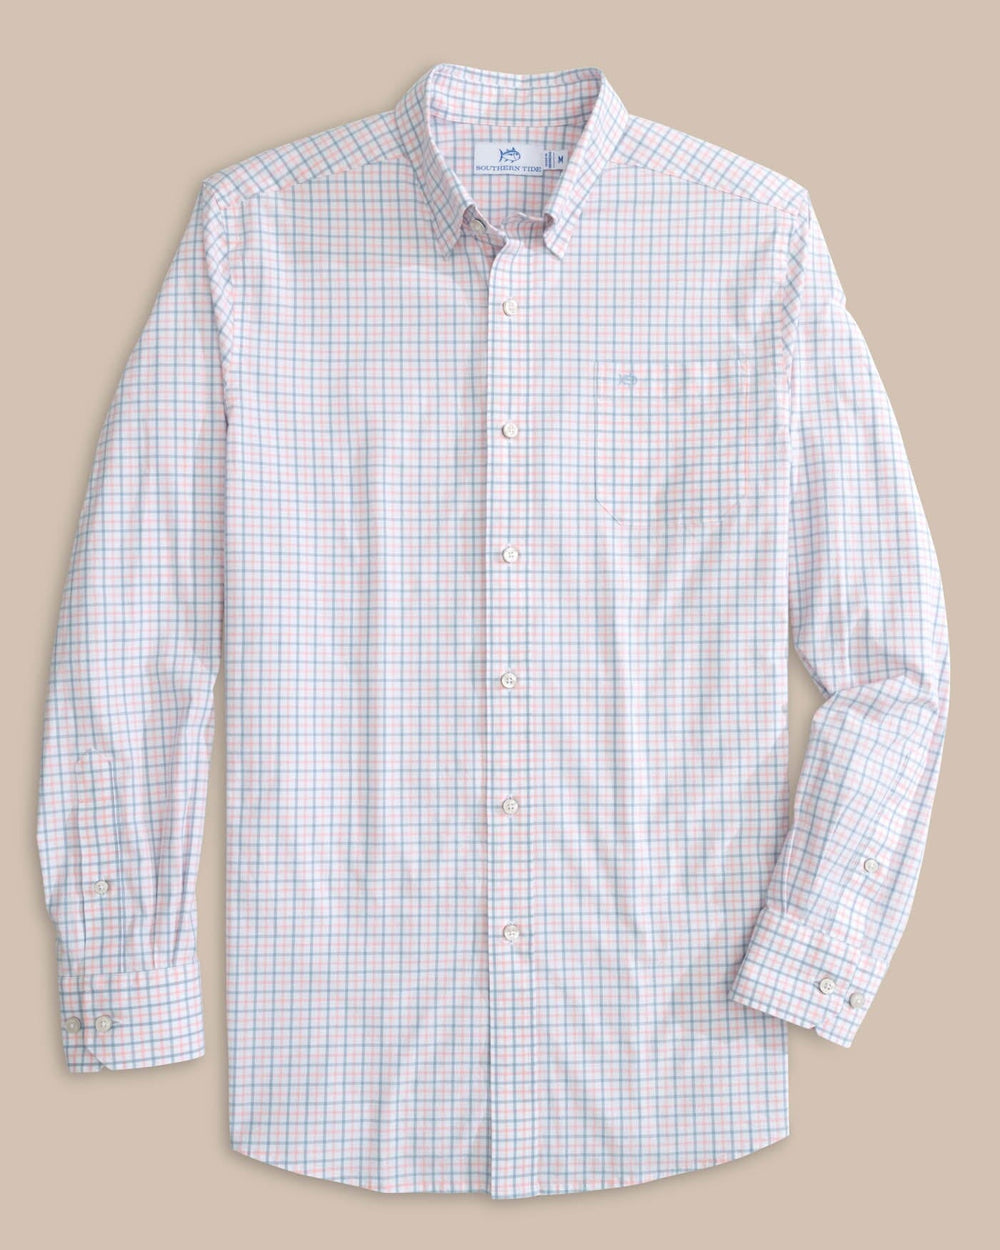 The detail view of the Southern Tide Charleston Larkin Check Long Sleeve Sport Shirt by Southern Tide - Pale Rosette Pink